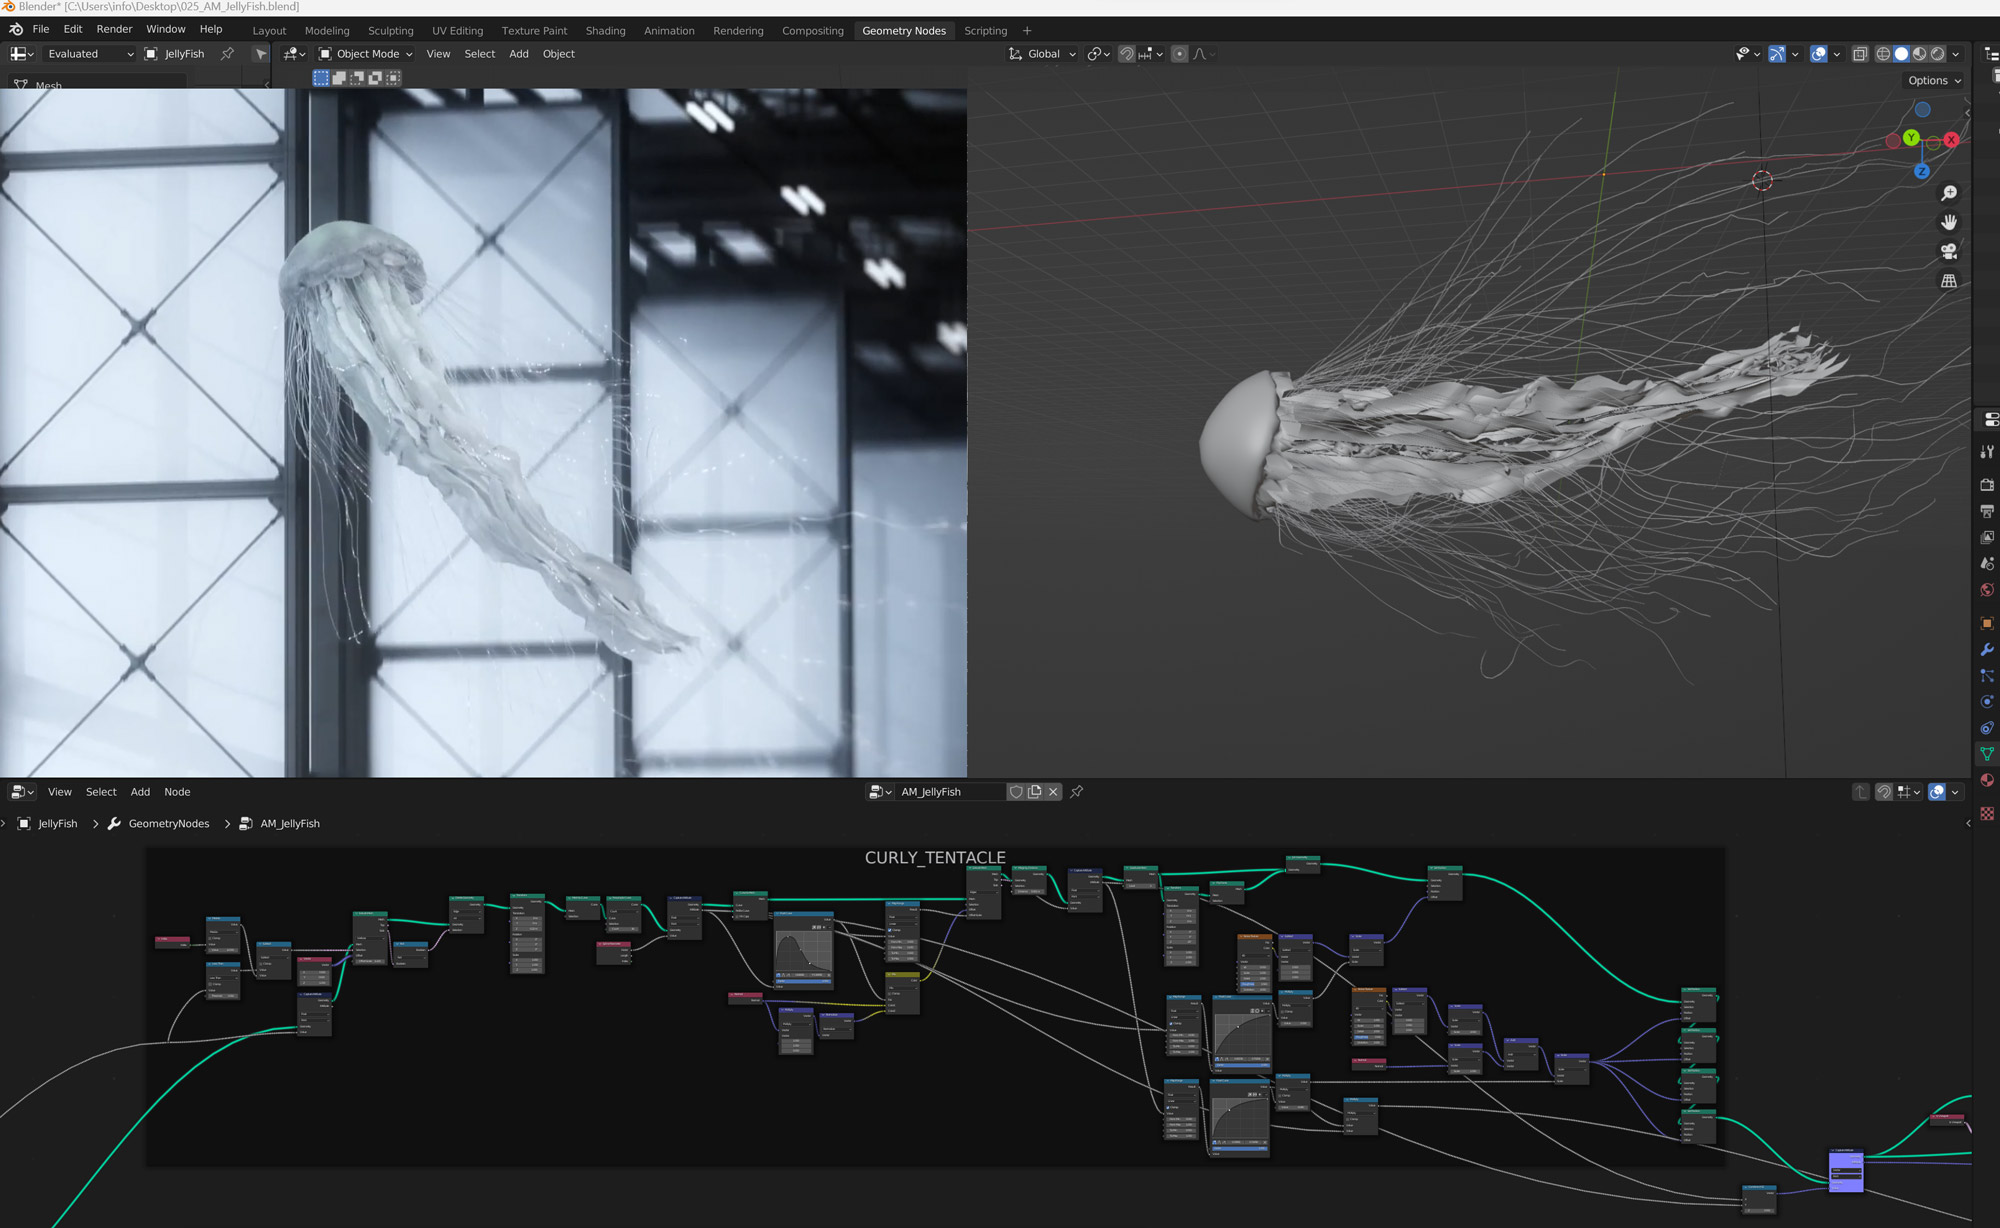 Jellyfish Animation with Geometry nodes Download - 3DArt